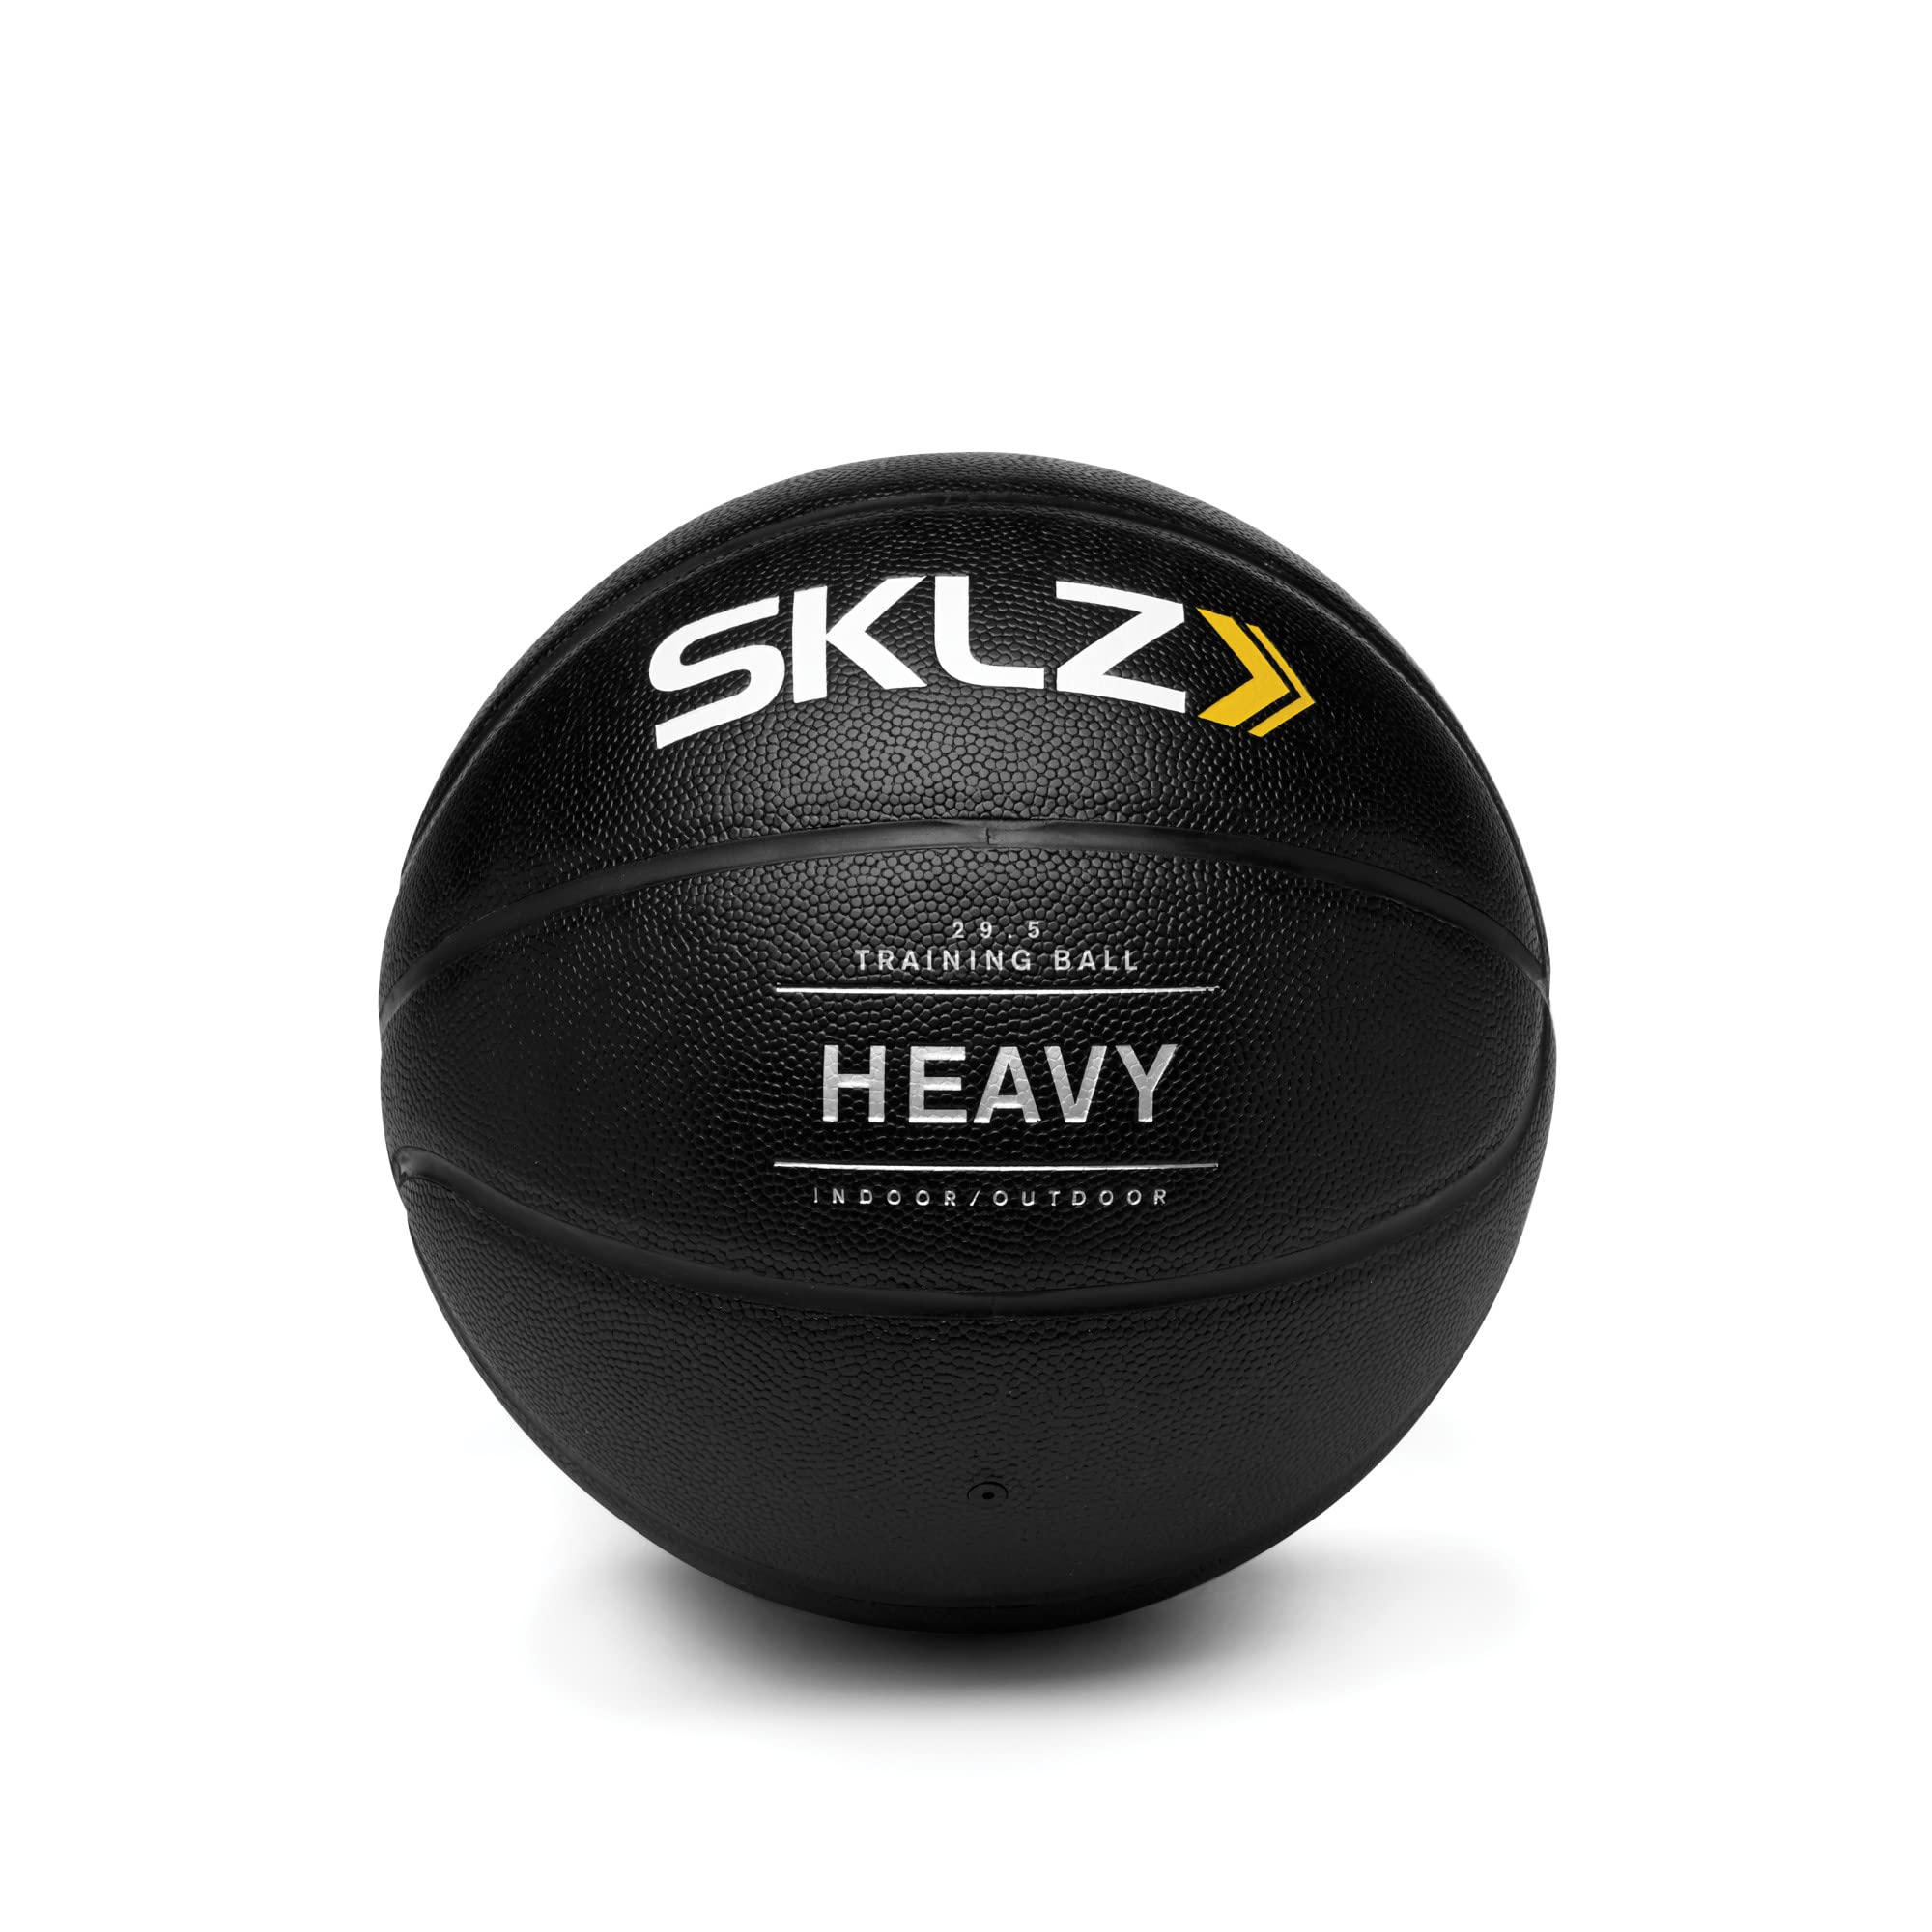 SKLZ Weighted Training Basketball to Improve Dribbling, Passing, and Ball Control, Great for All Ages